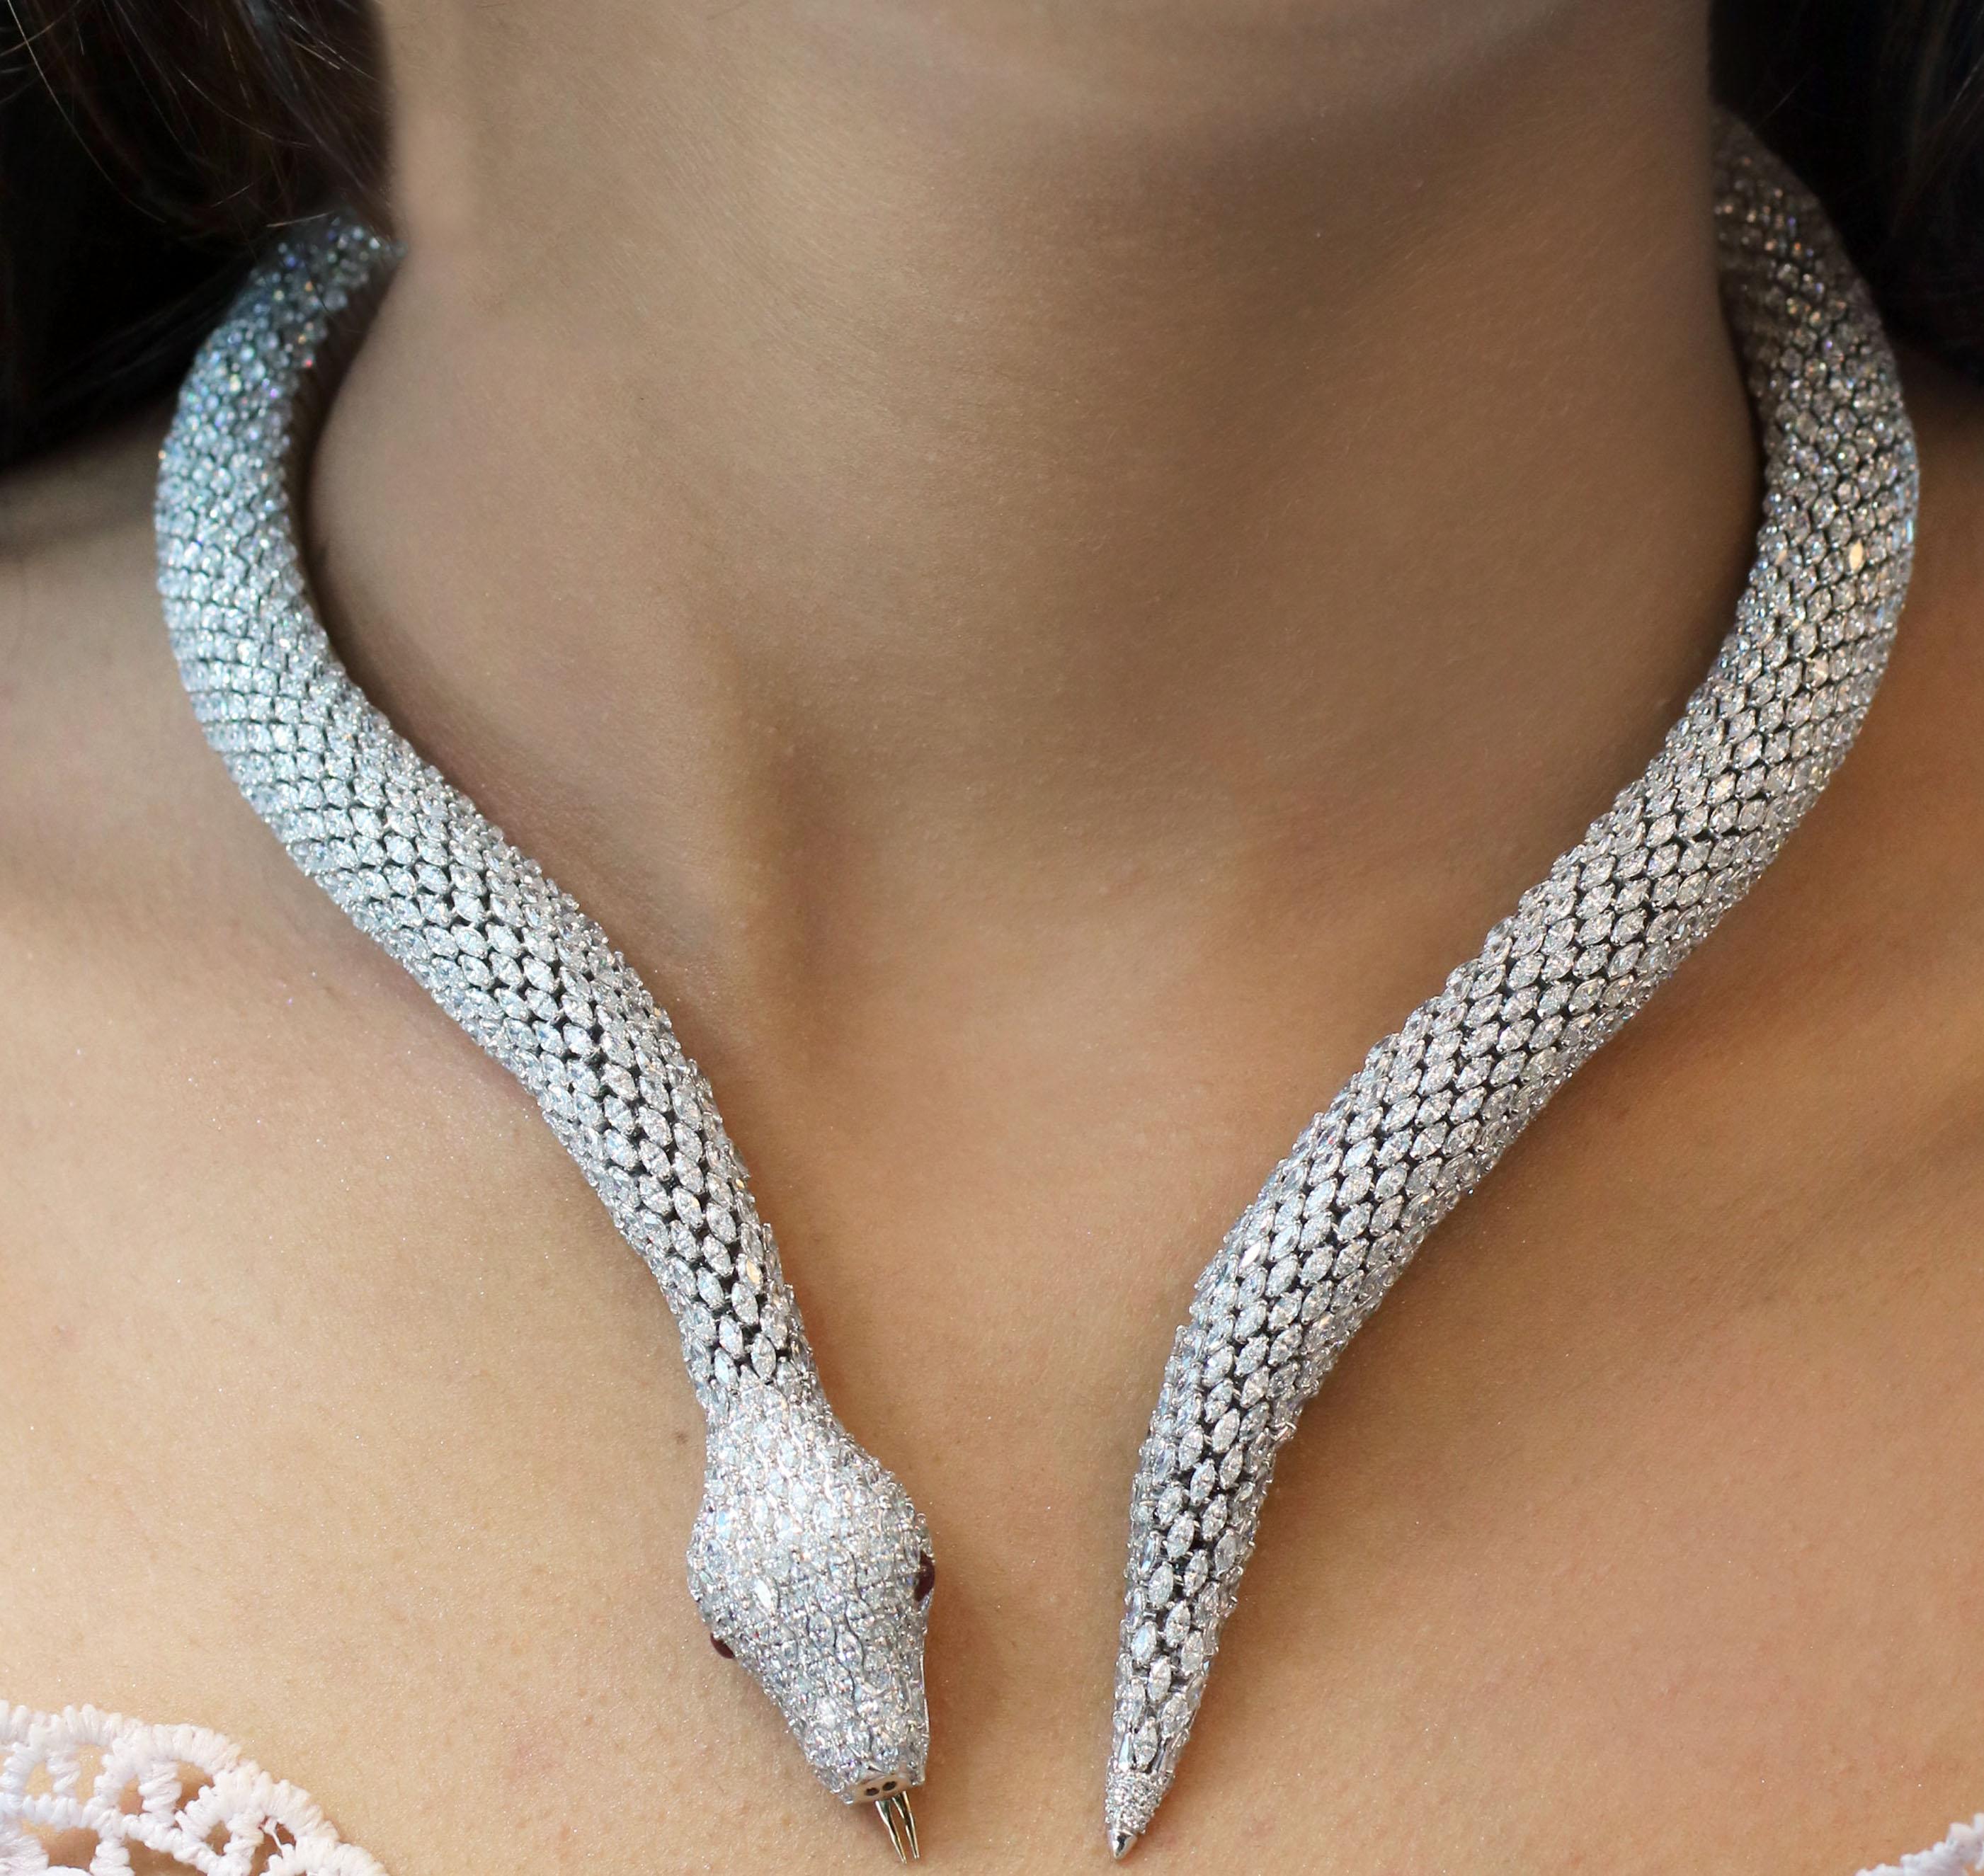 Gross Weight: 223.58 Grams
Diamond Weight: 68.83 cts
Colour Stone Weight: 0.27 cts
Neck Size: 13.5 inches
IGI Certified: Summary No: 25J155401808

Video of the product can be shared on request.

Our serpentine-inspired collar necklace recreates the